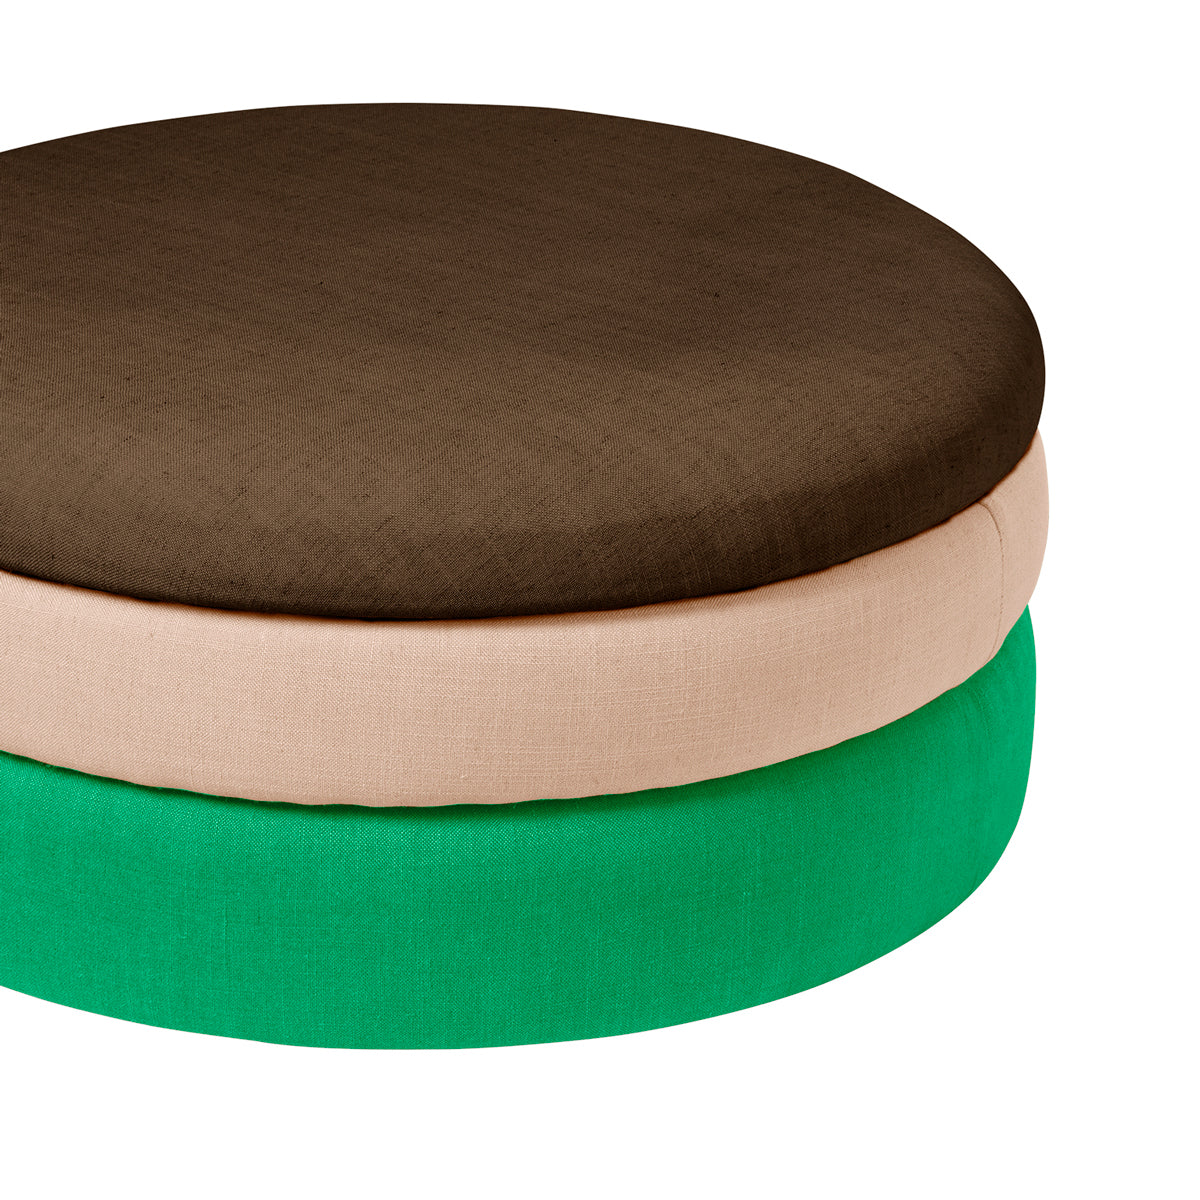 Pouf Pond Emerald Green, Rose, Coffee Large